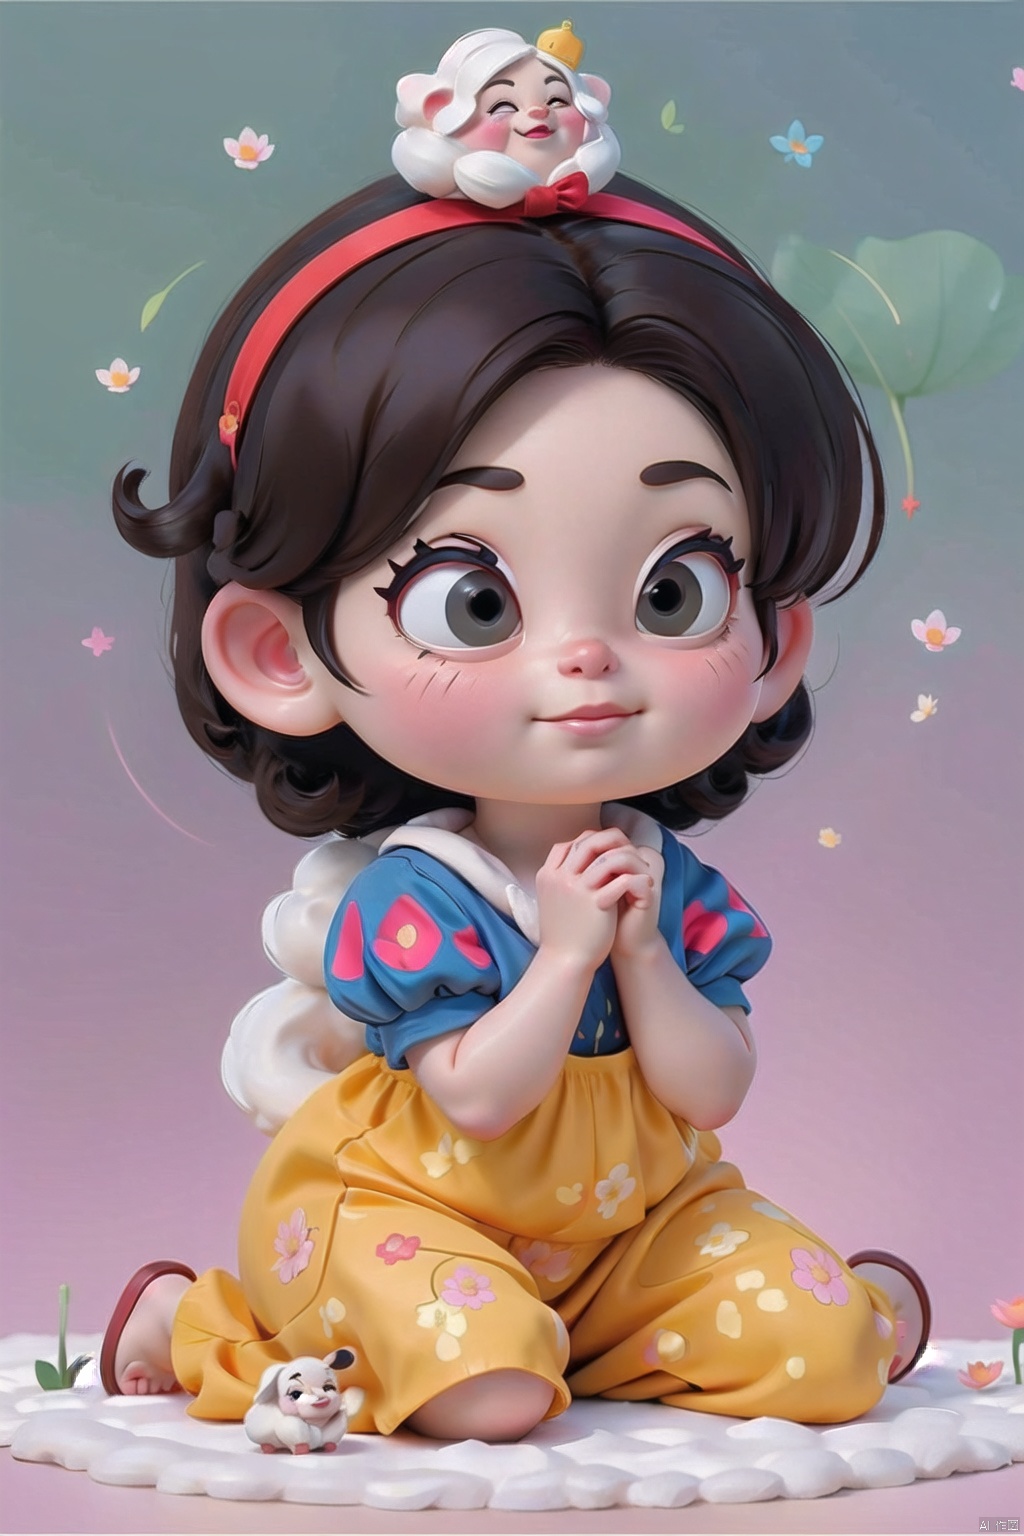 Solid color background, vector illustration, cartoon avatar, super seated cute snow white with red bow hairpin on her head, sitting on a lotus flower, eyes closed, hands folded to make a wish, minimalist thick lines, stick figures, lines puppy style